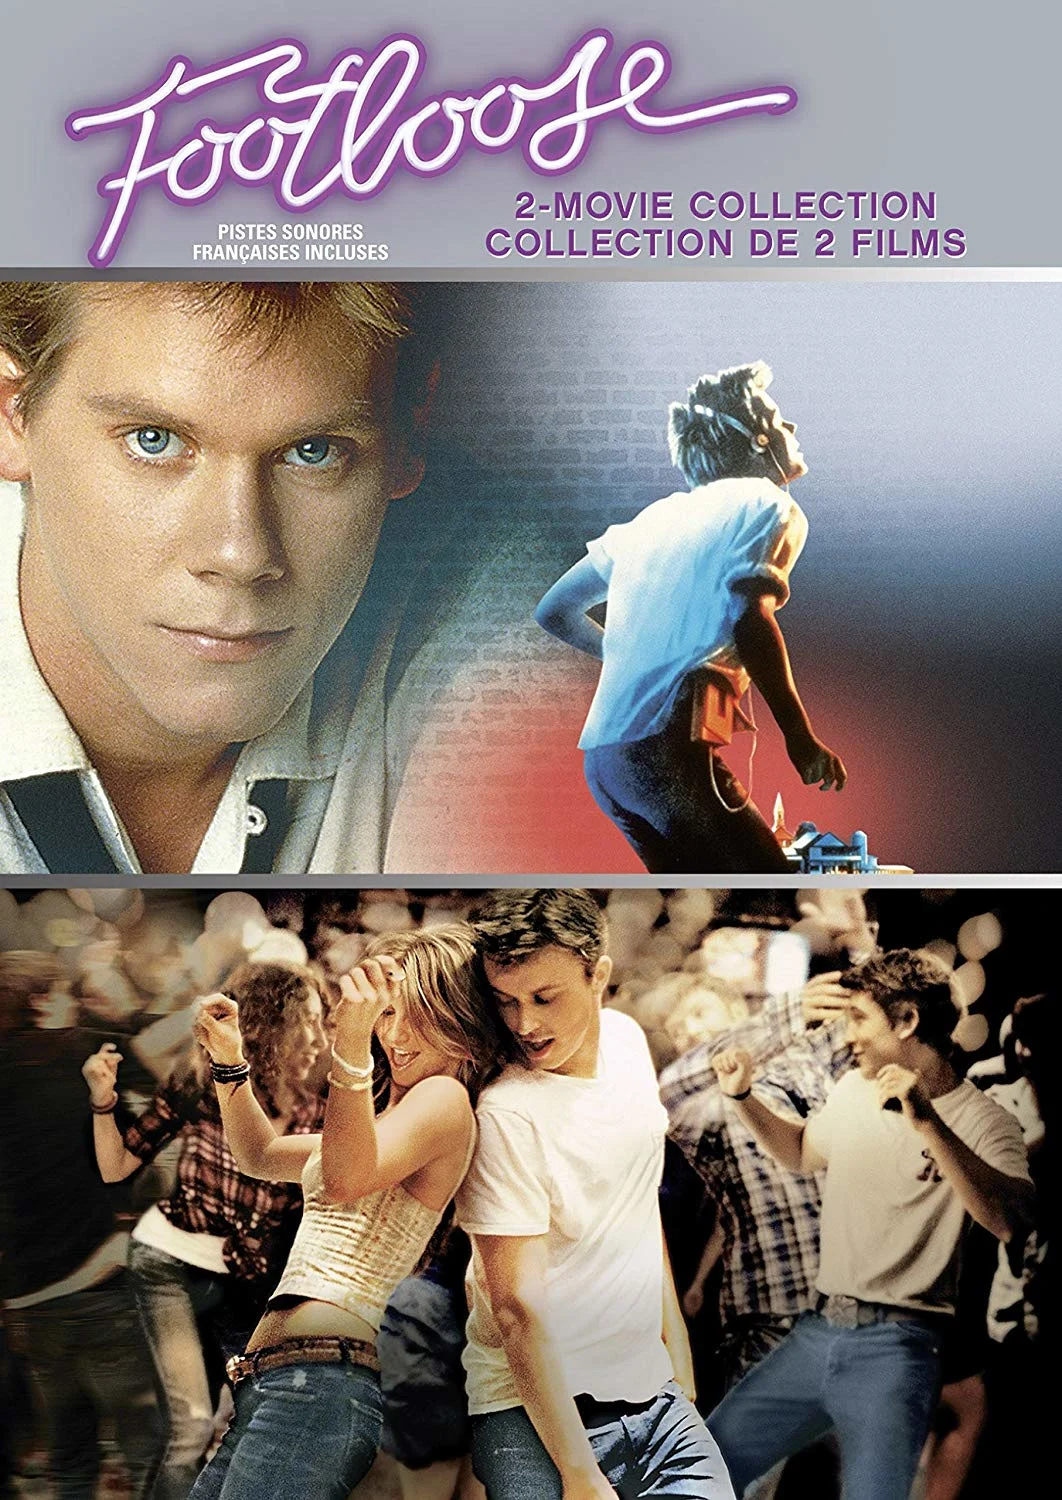 Footloose: 2 Movie Collection (DVD) on MovieShack